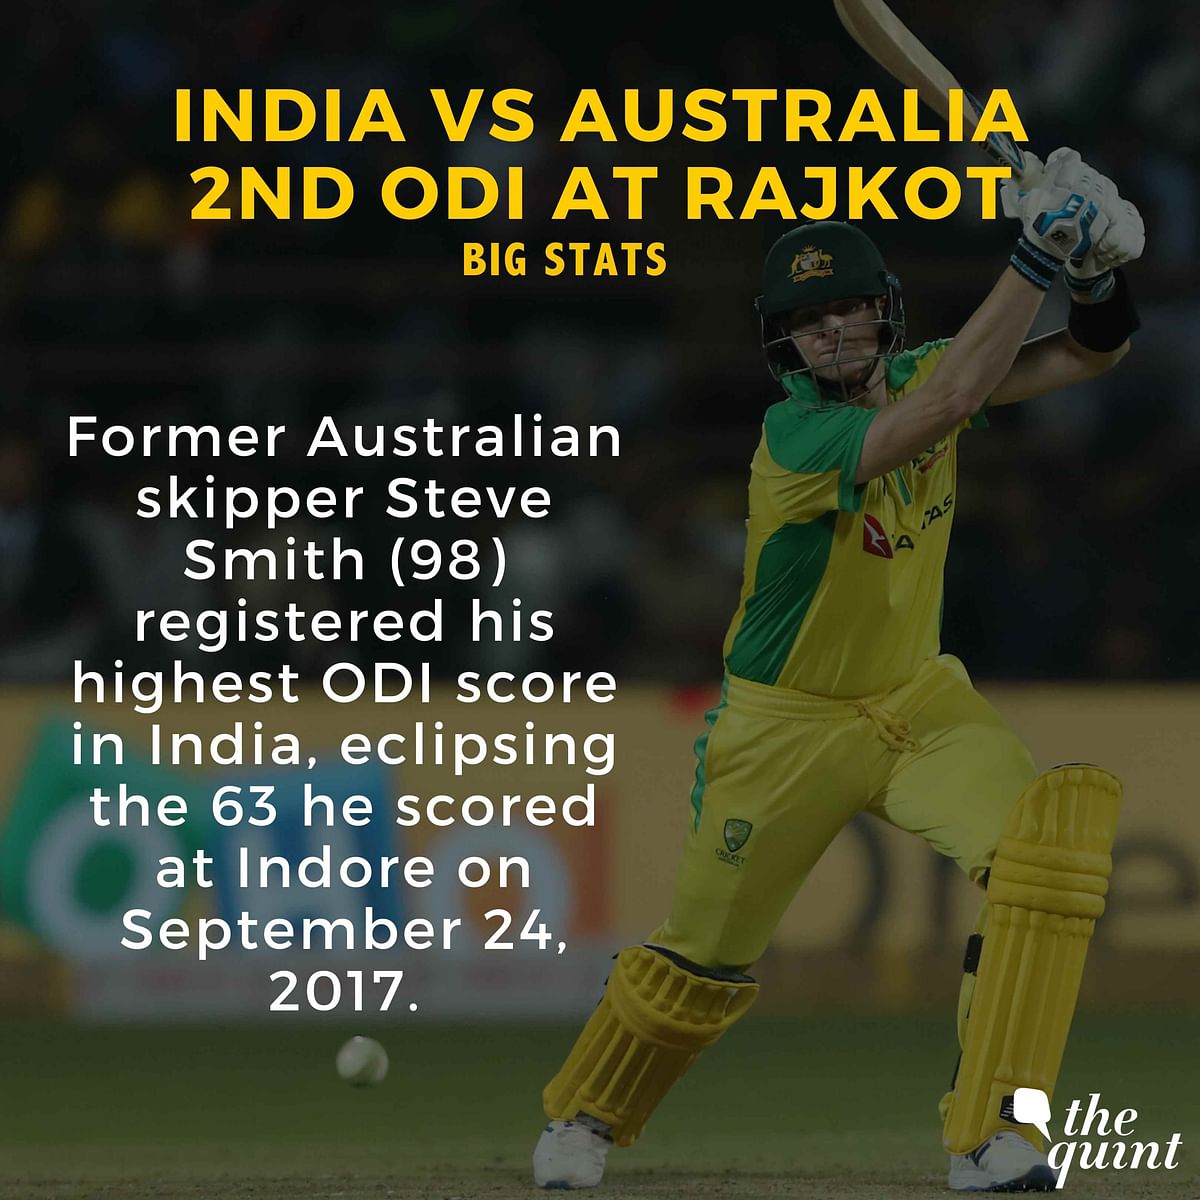 Here’s a look at a few records broken as India beat Australia in the 2nd ODI in Rajkot on Friday.